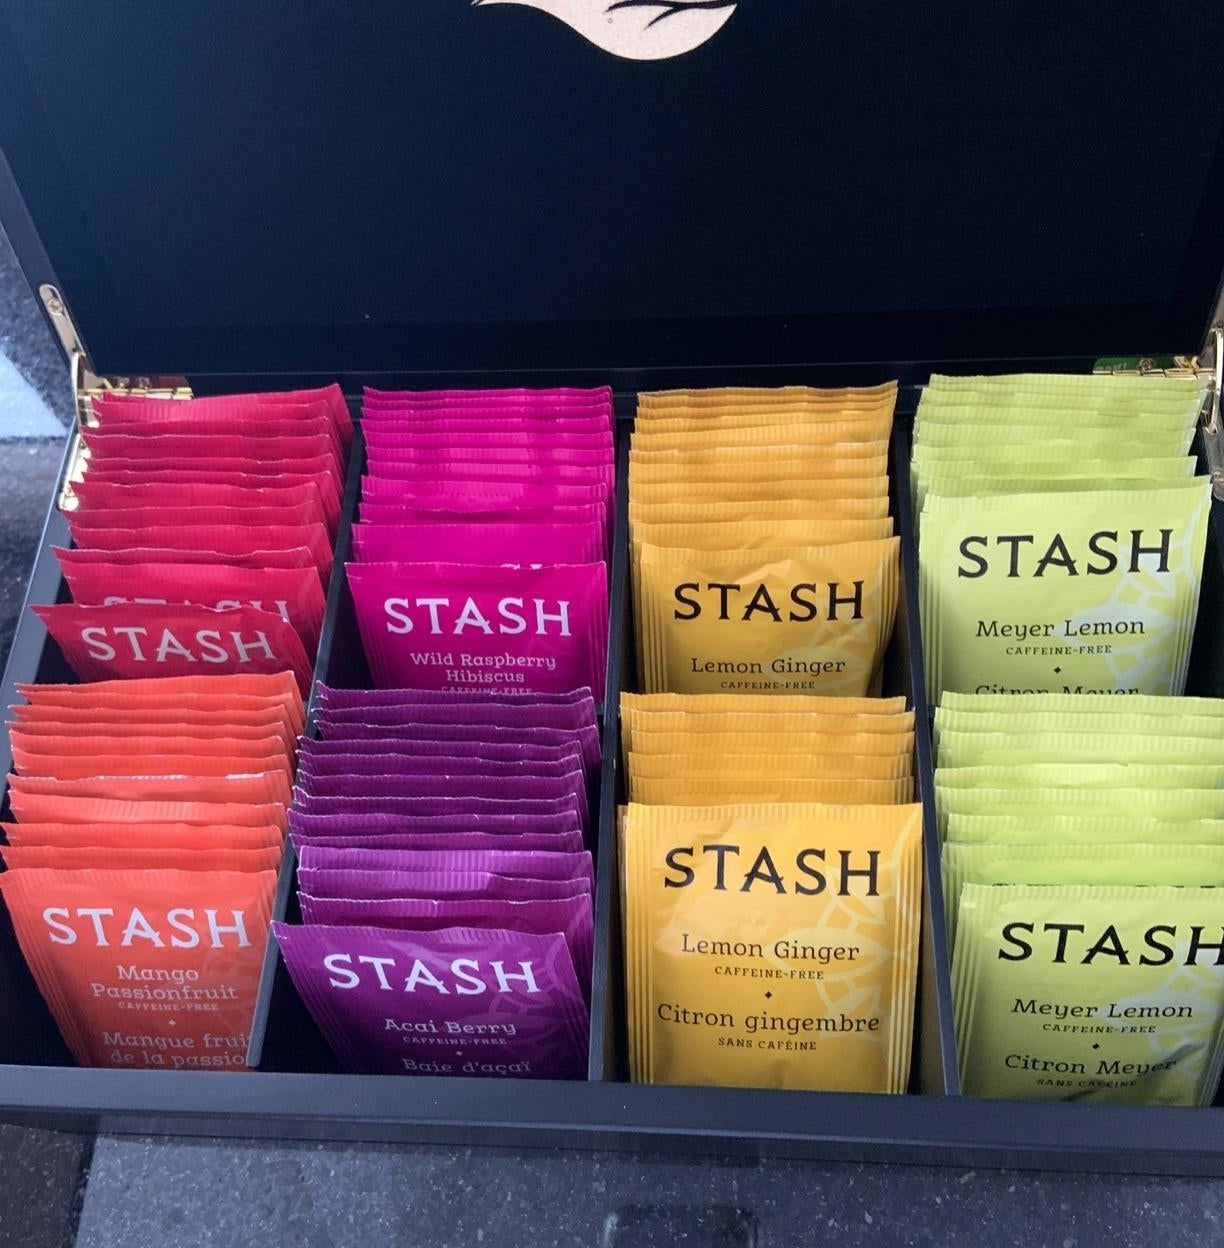 A variety of Stash tea packets, including Wild Raspberry, Lemon Ginger, and Meyer Lemon, are neatly organized in a box